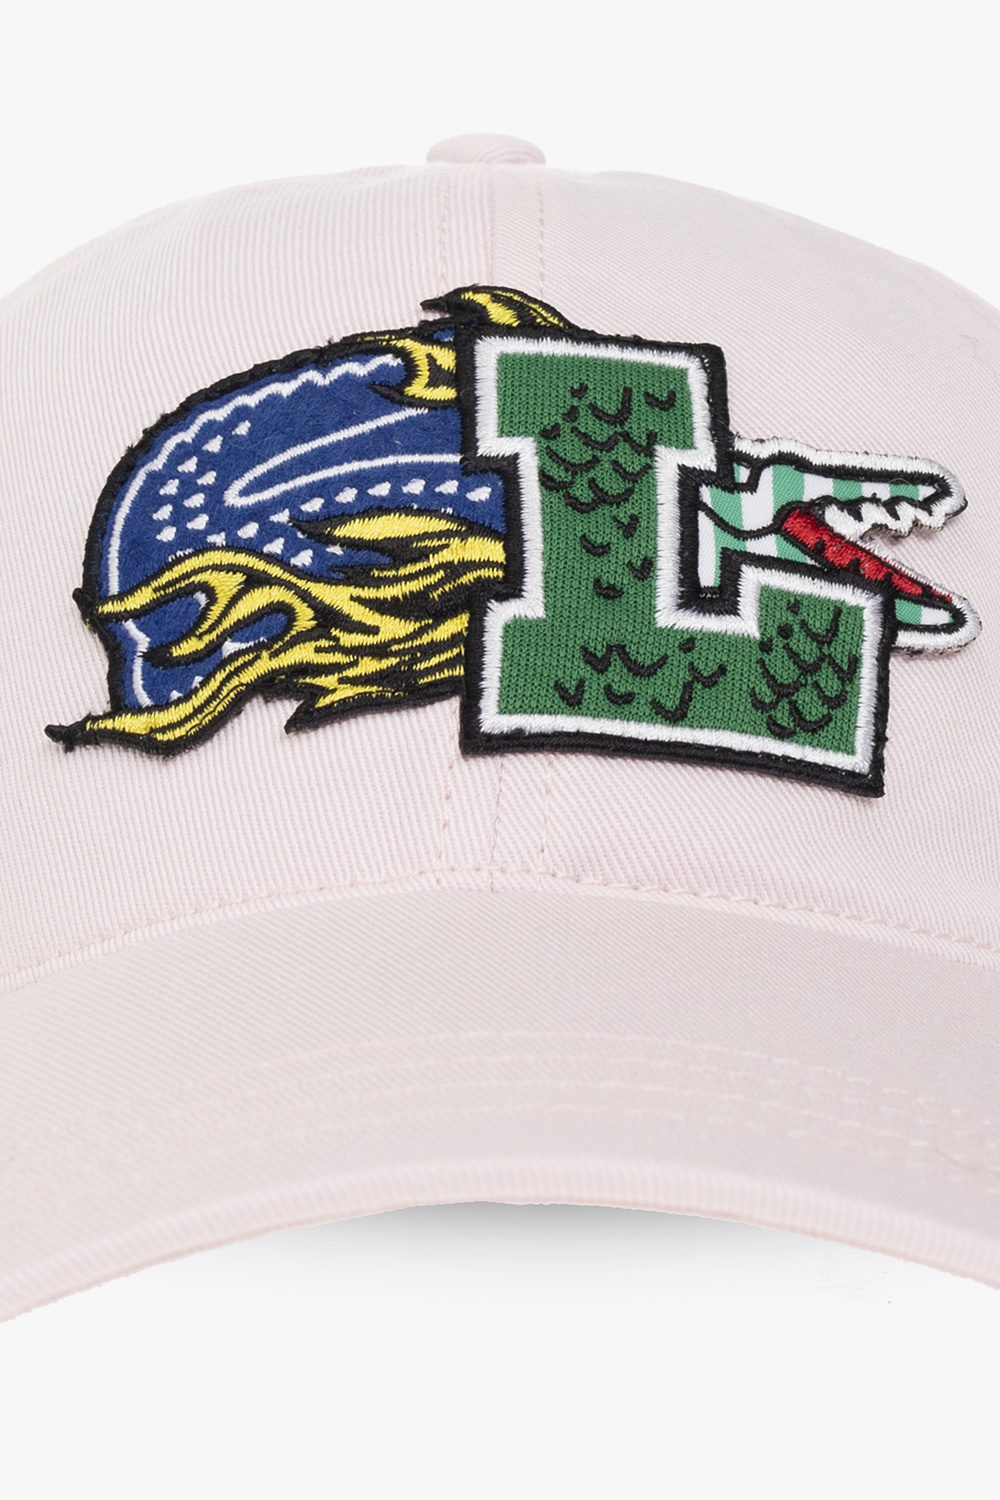 IetpShops Japan a with with - atmos Serve and Cap Serve - collection collaborated Lacoste Lacoste logo Pink new on